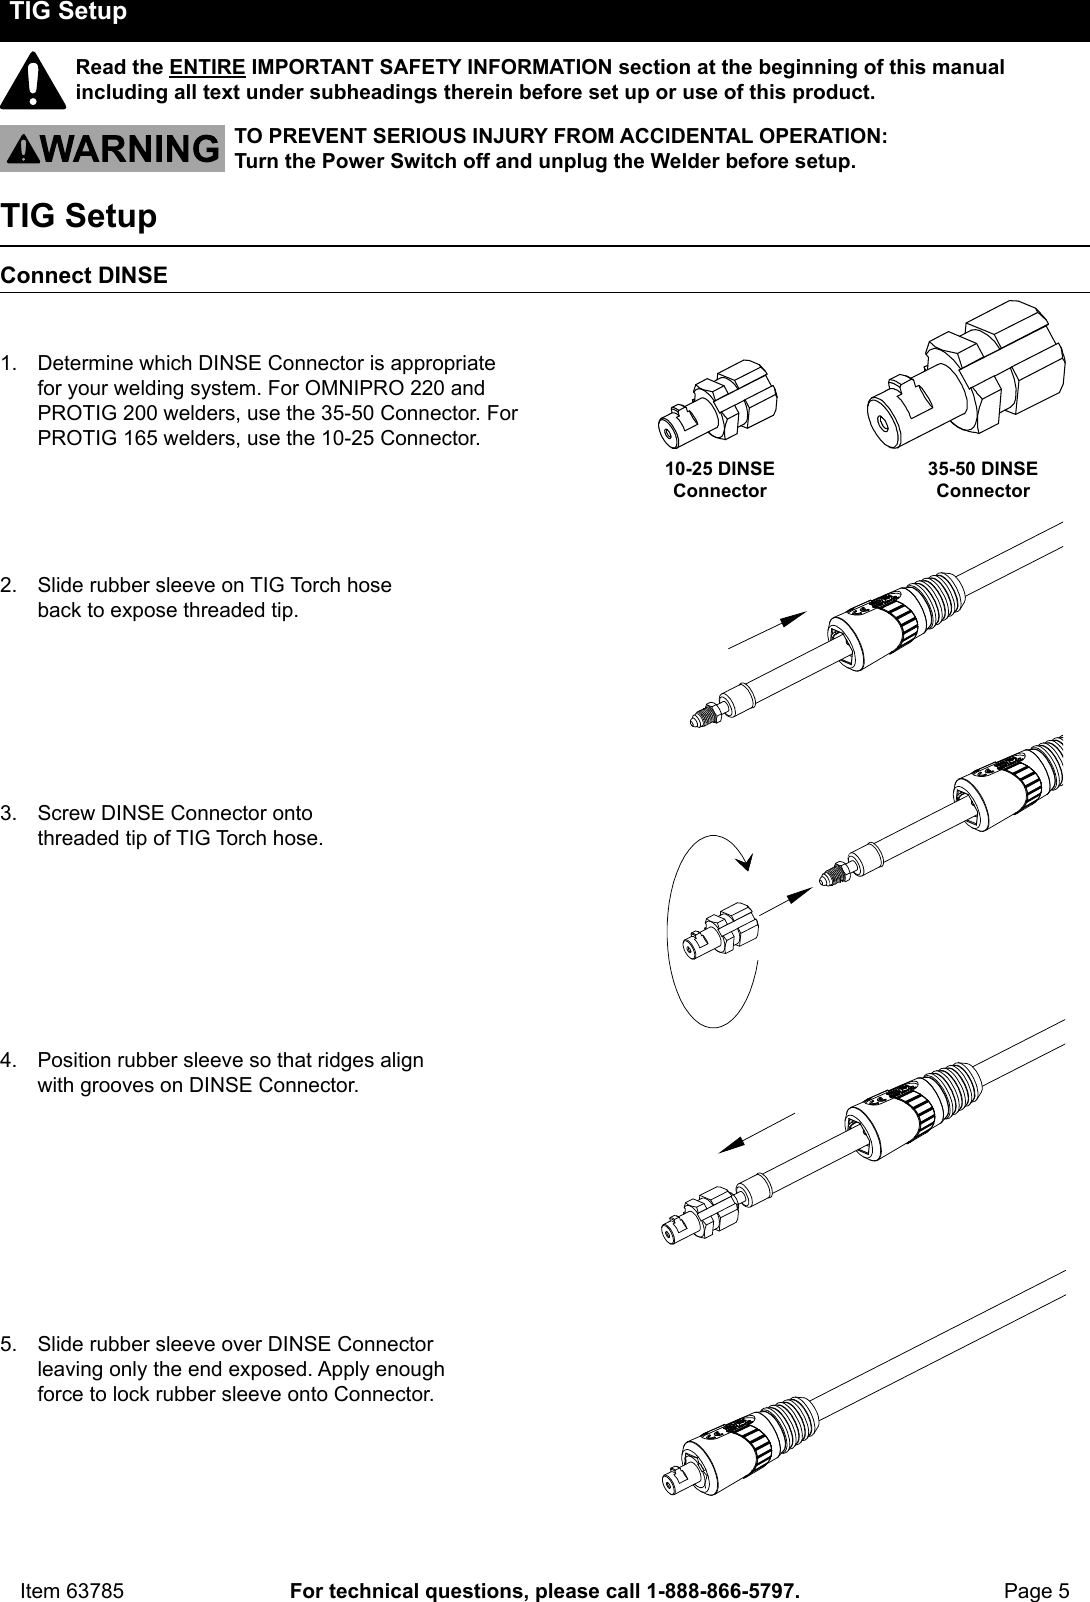 Page 5 of 12 - Manual For The 63785 150A TIG Torch